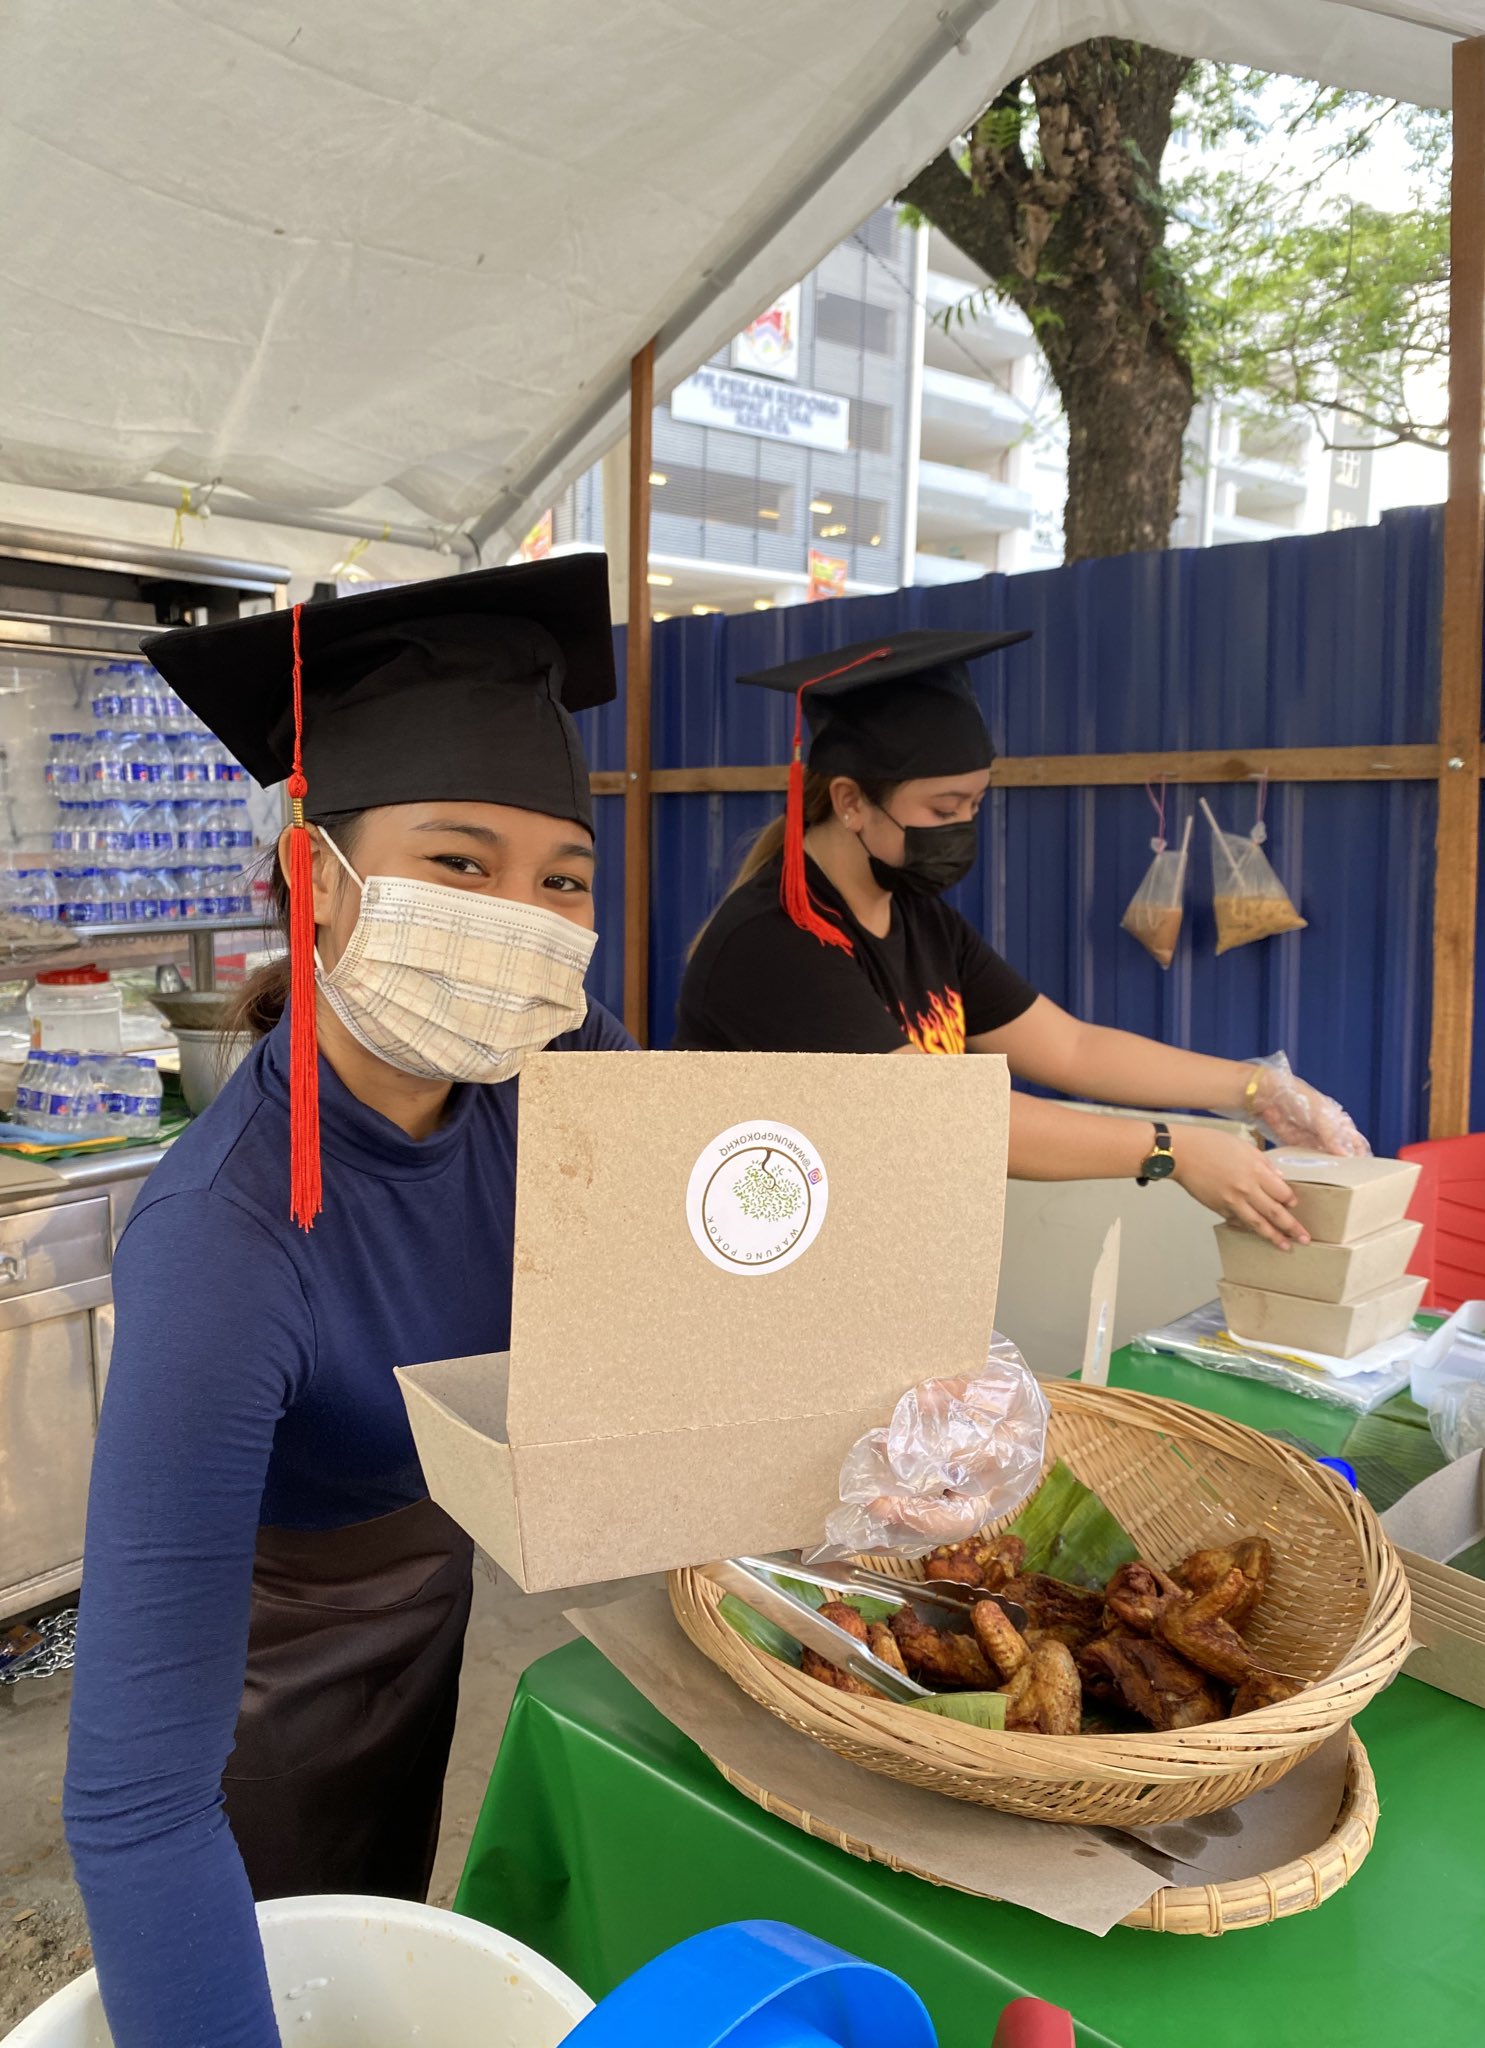 Top ukm student sells nasi lemak by the roadside while waiting for her convocation